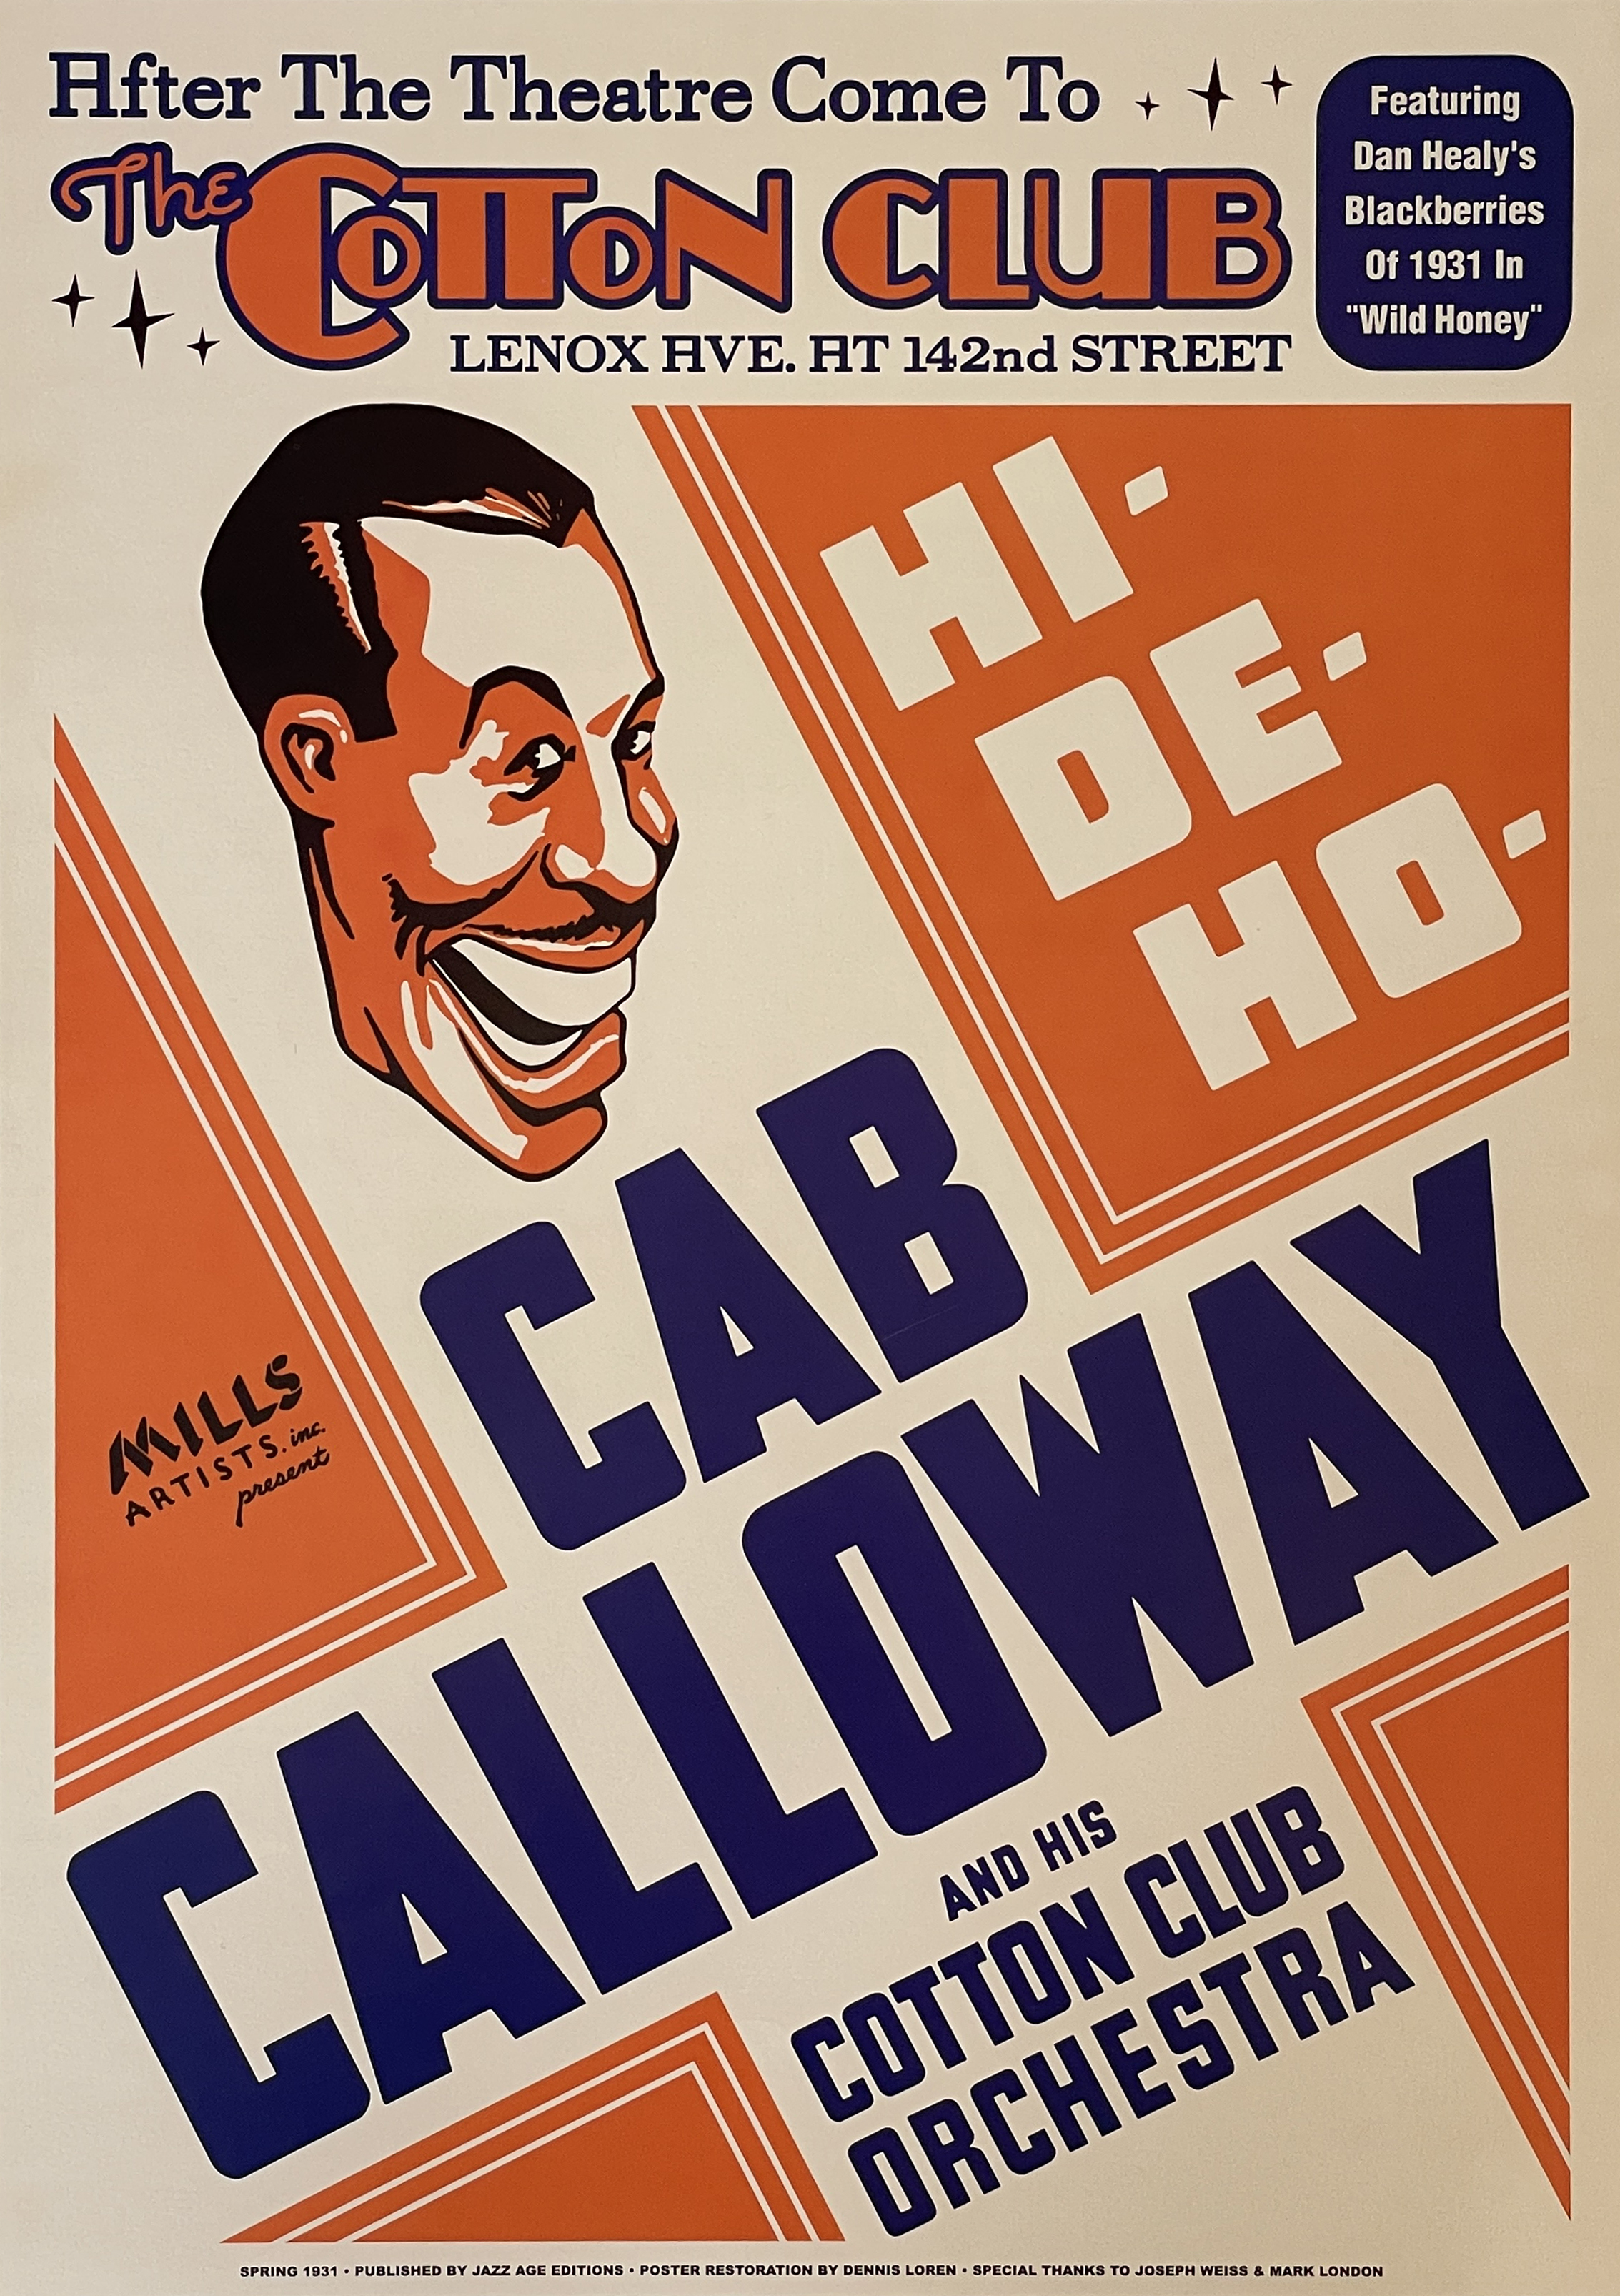 Cab Calloway and His Cotton Club Orchetsra